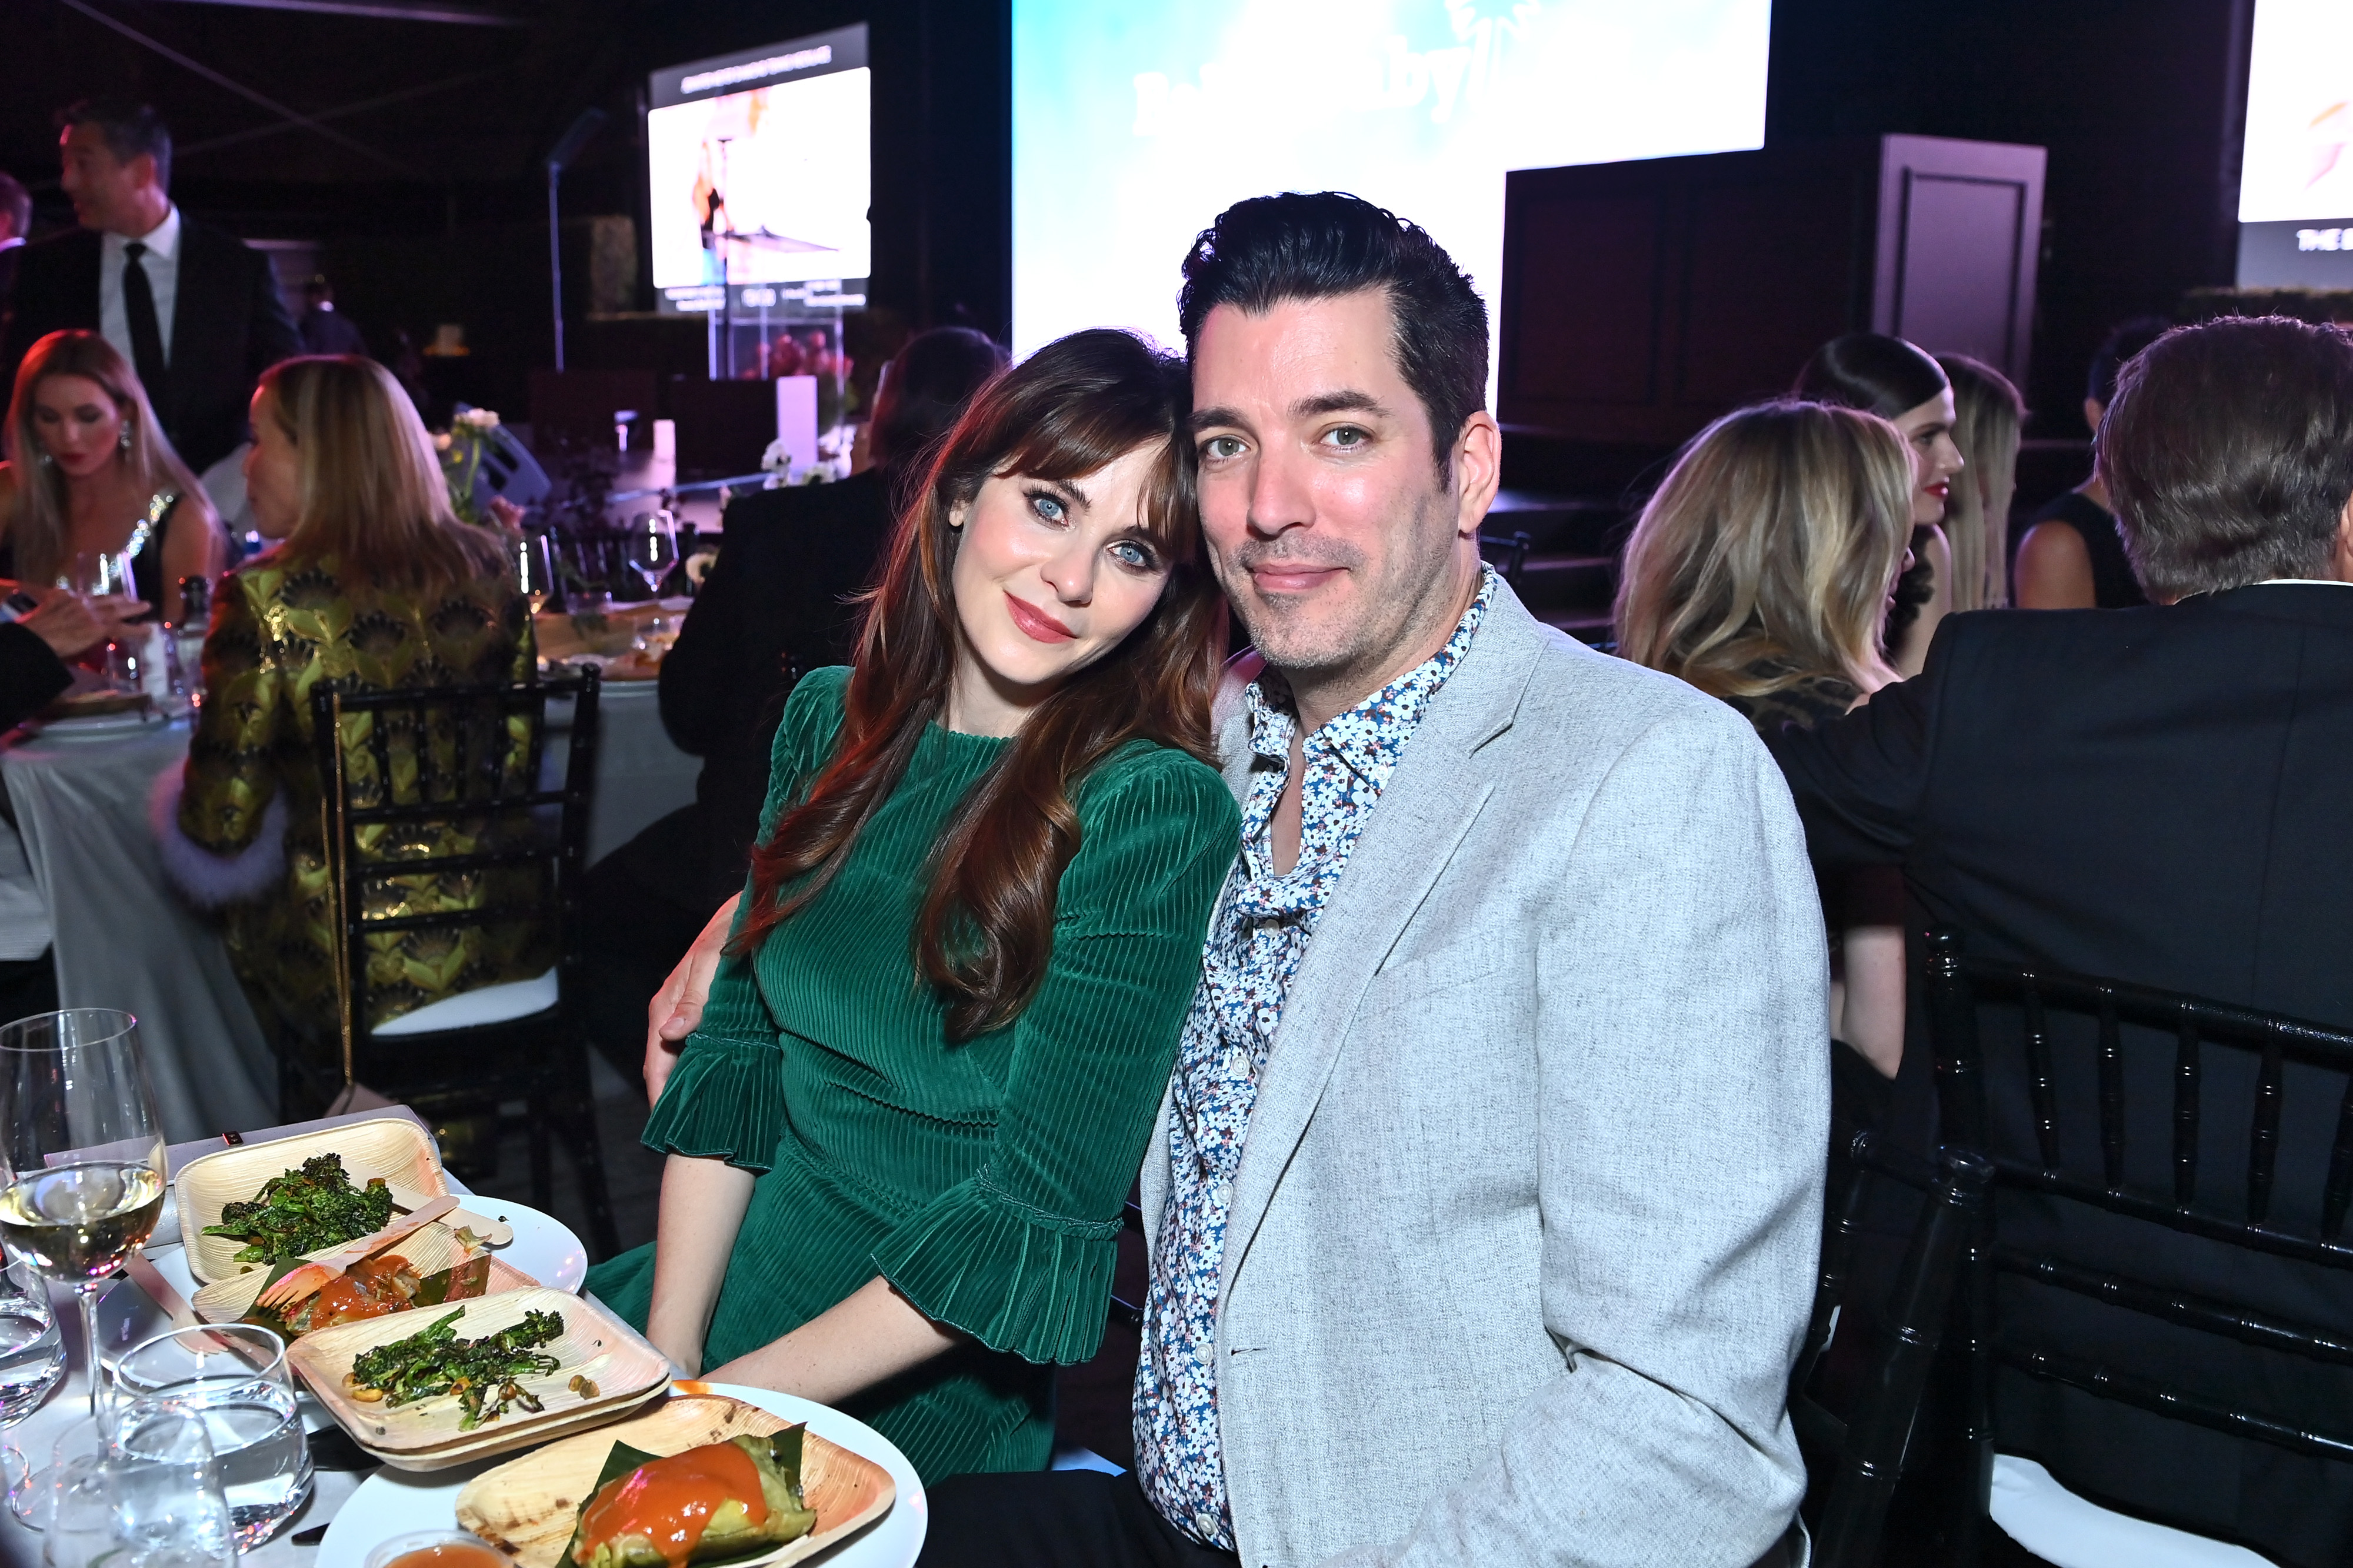 Zooey Deschanel wearing a green dress poses with Jonathan Scott, wearing a blue suit jacket, during a dinner.